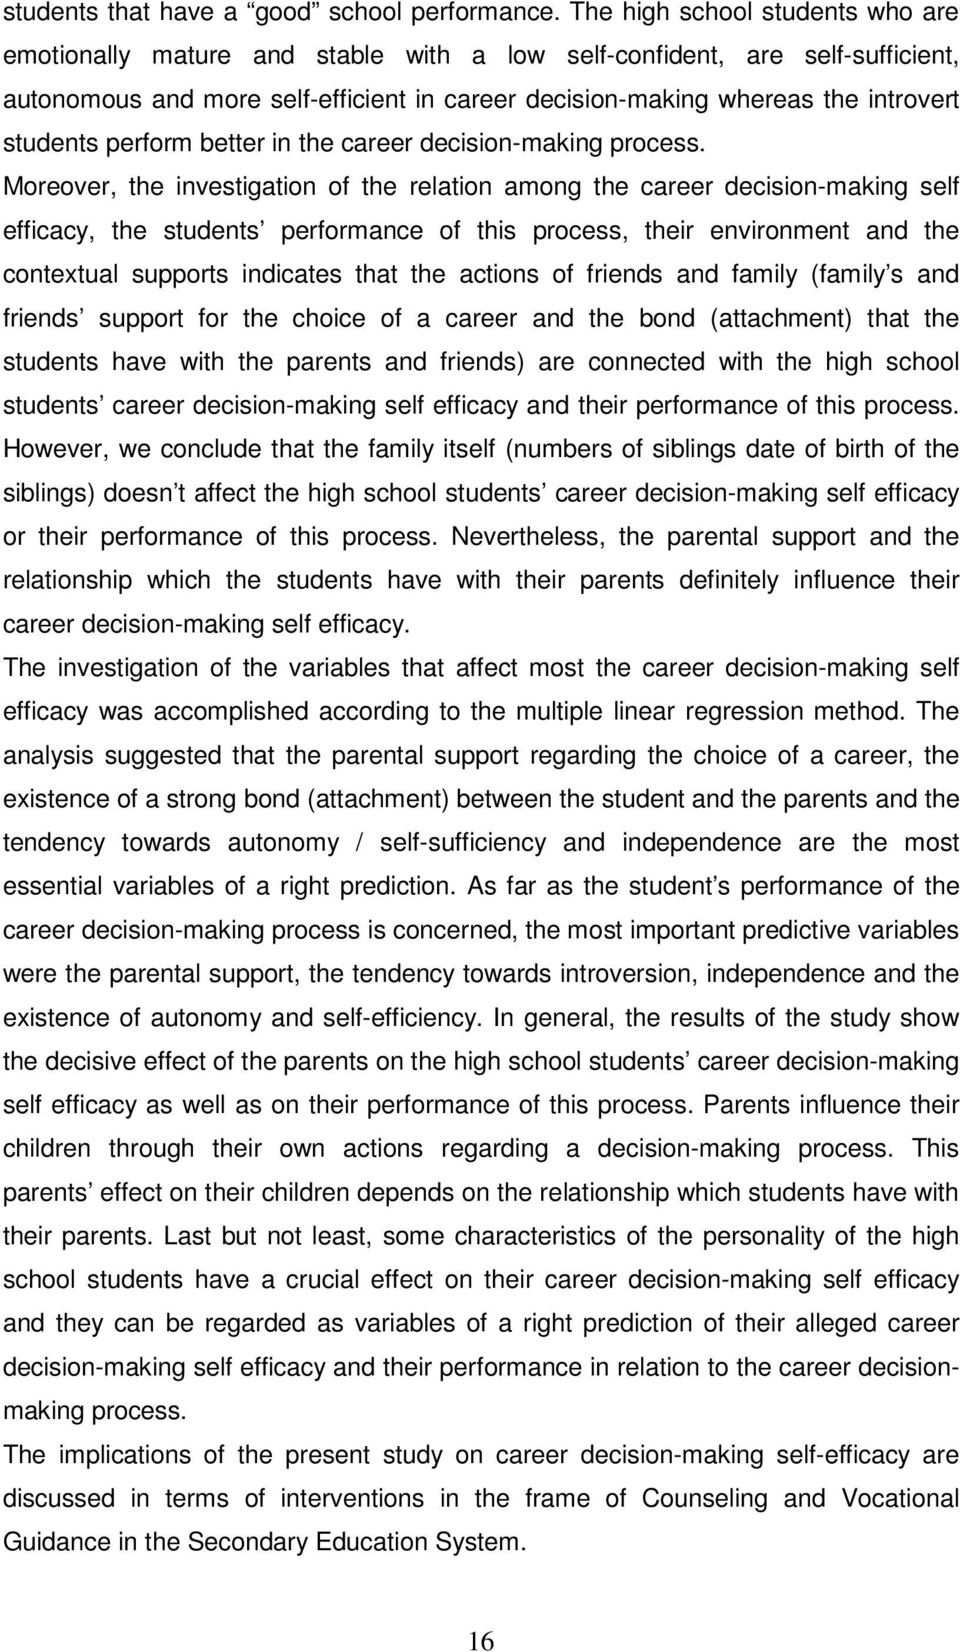 students perform better in the career decision-making process.